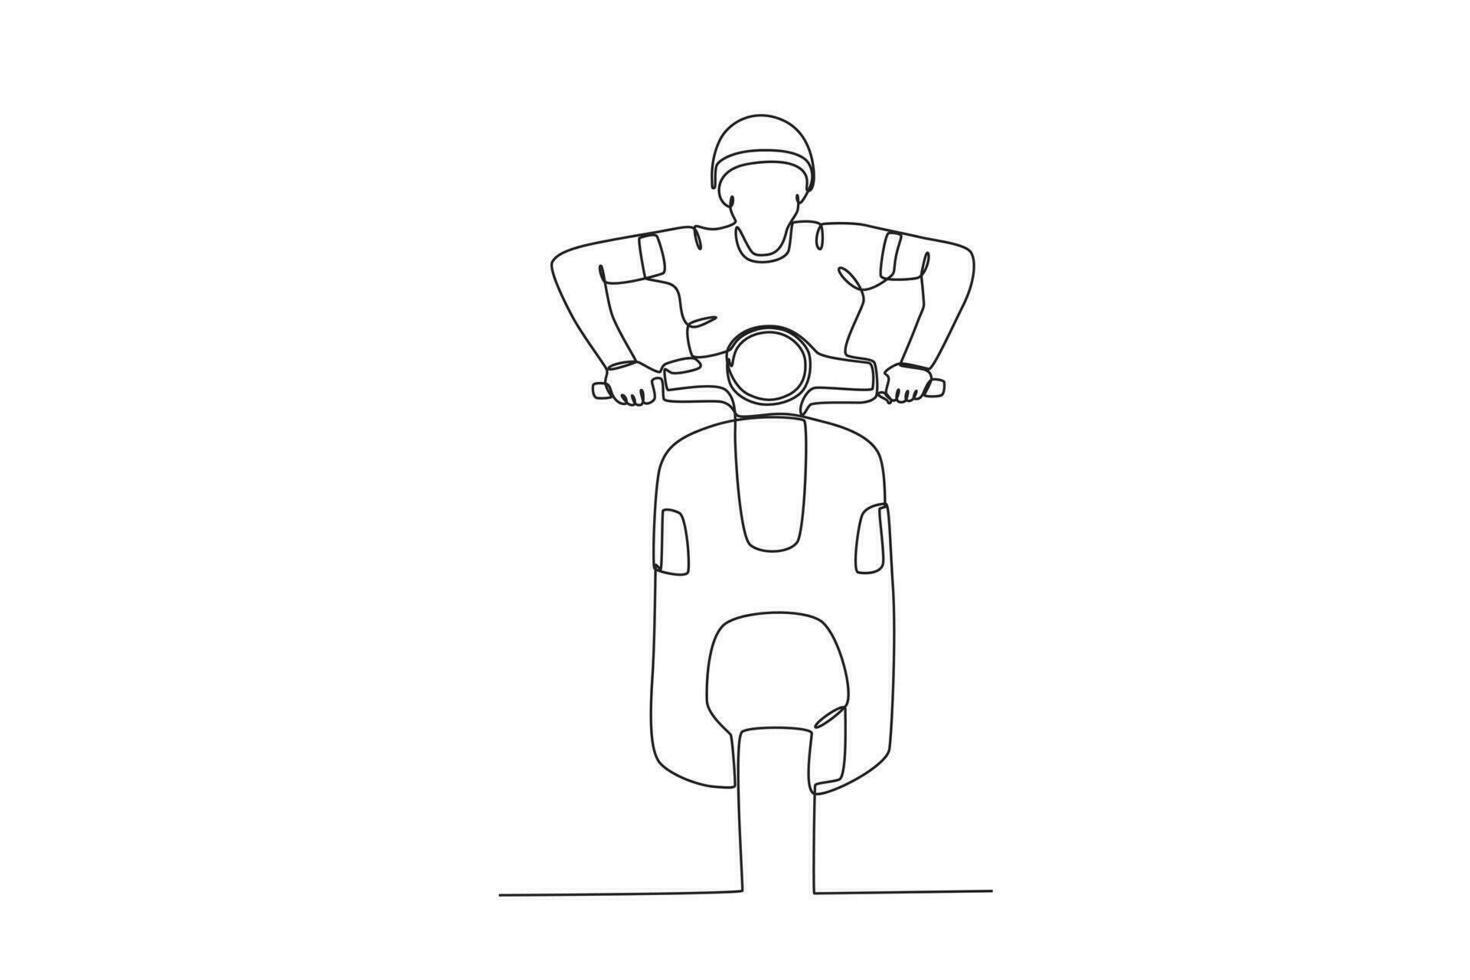 A man rides a motorcycle at speed vector